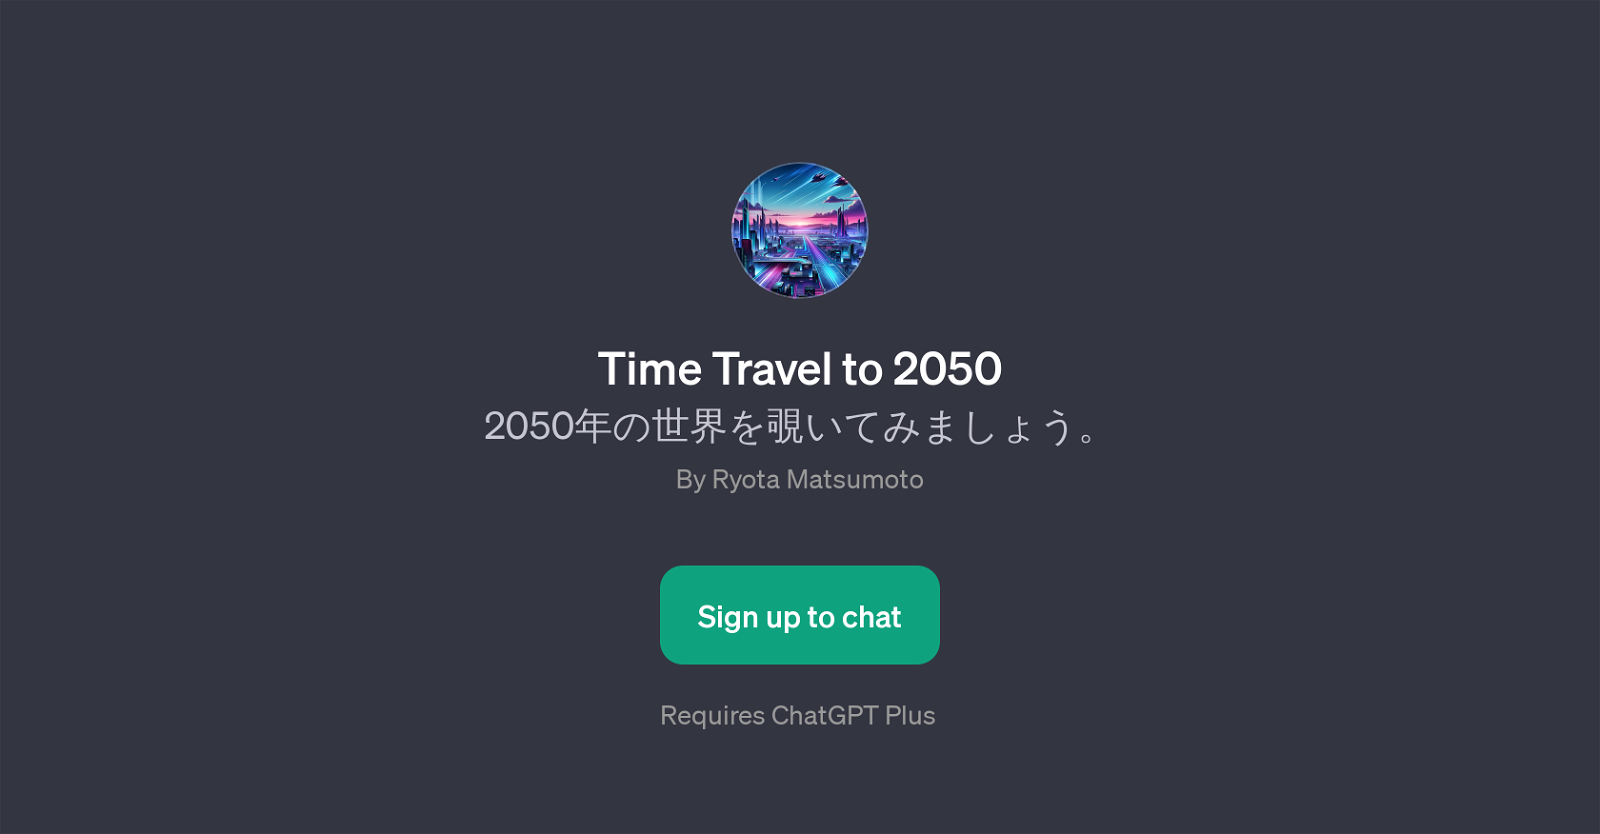 Time Travel to 2050 website